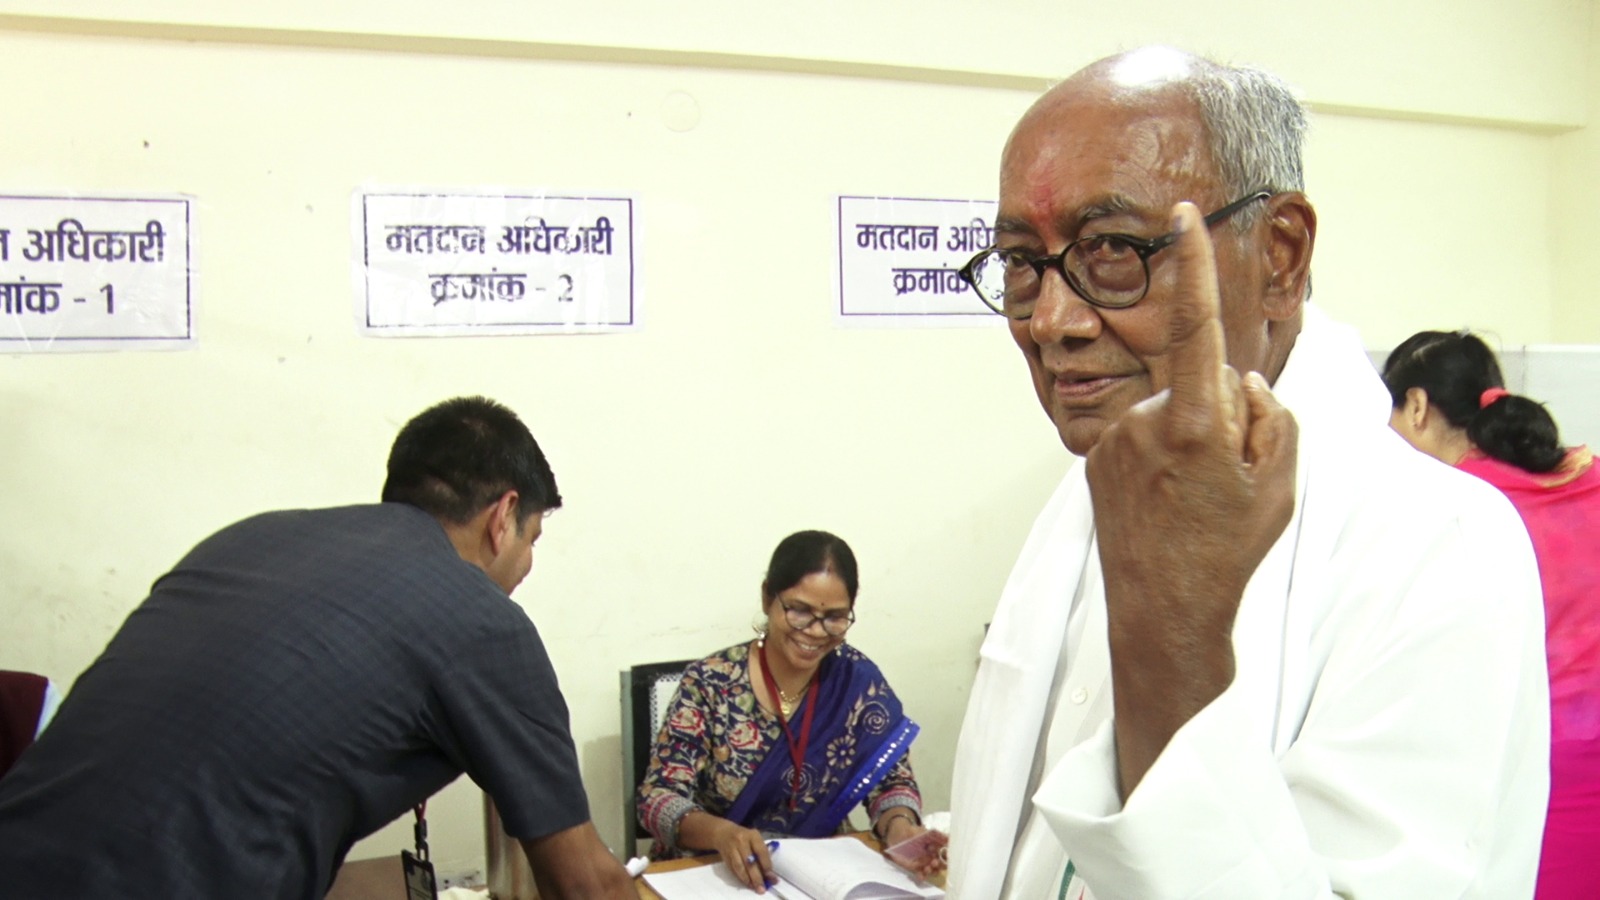 DIGVIJAY SINGH ANGRY DURING VOTING